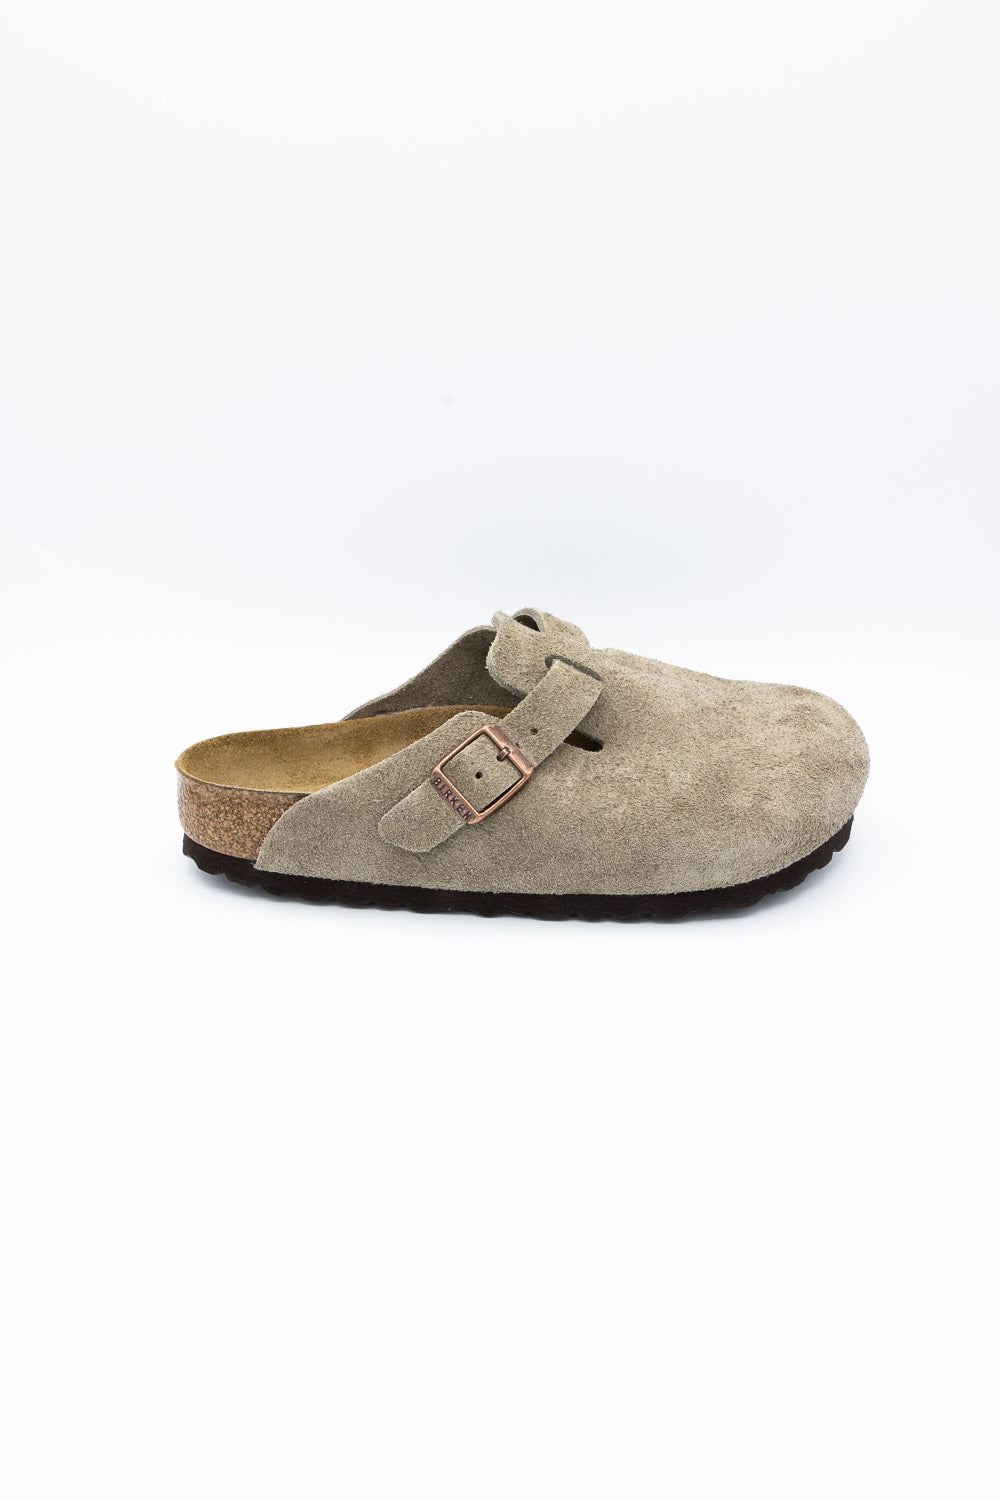 Birkenstock Boston Soft Footbed Suede Leather Clogs for Women in